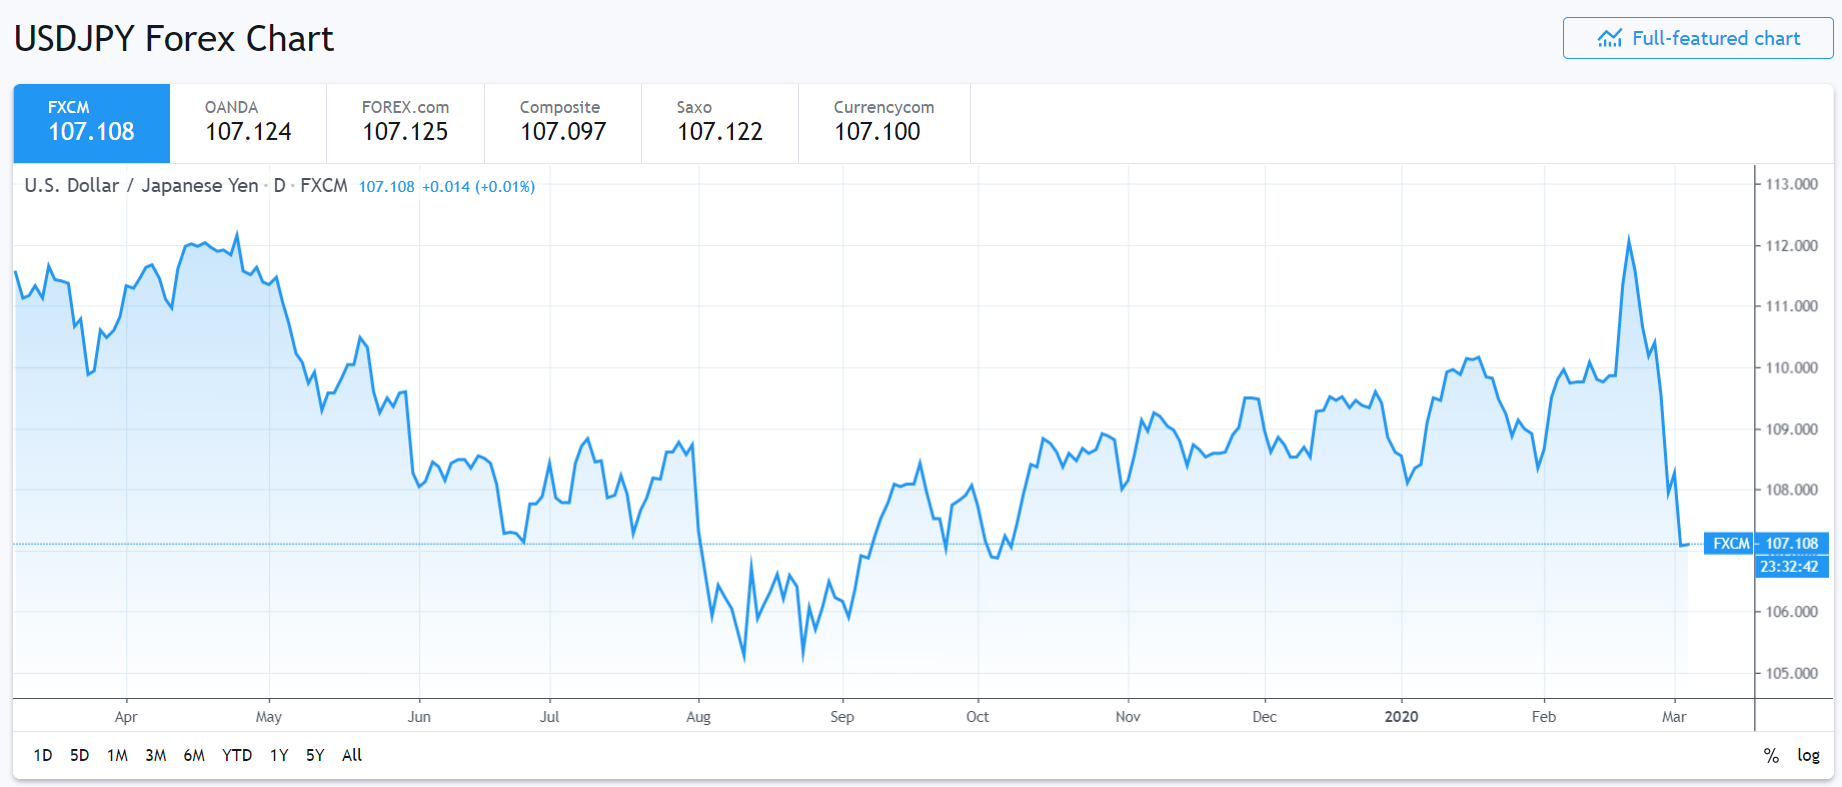 USD JPY 1 Year Chart - FXCM Trading View - 04 March 2020